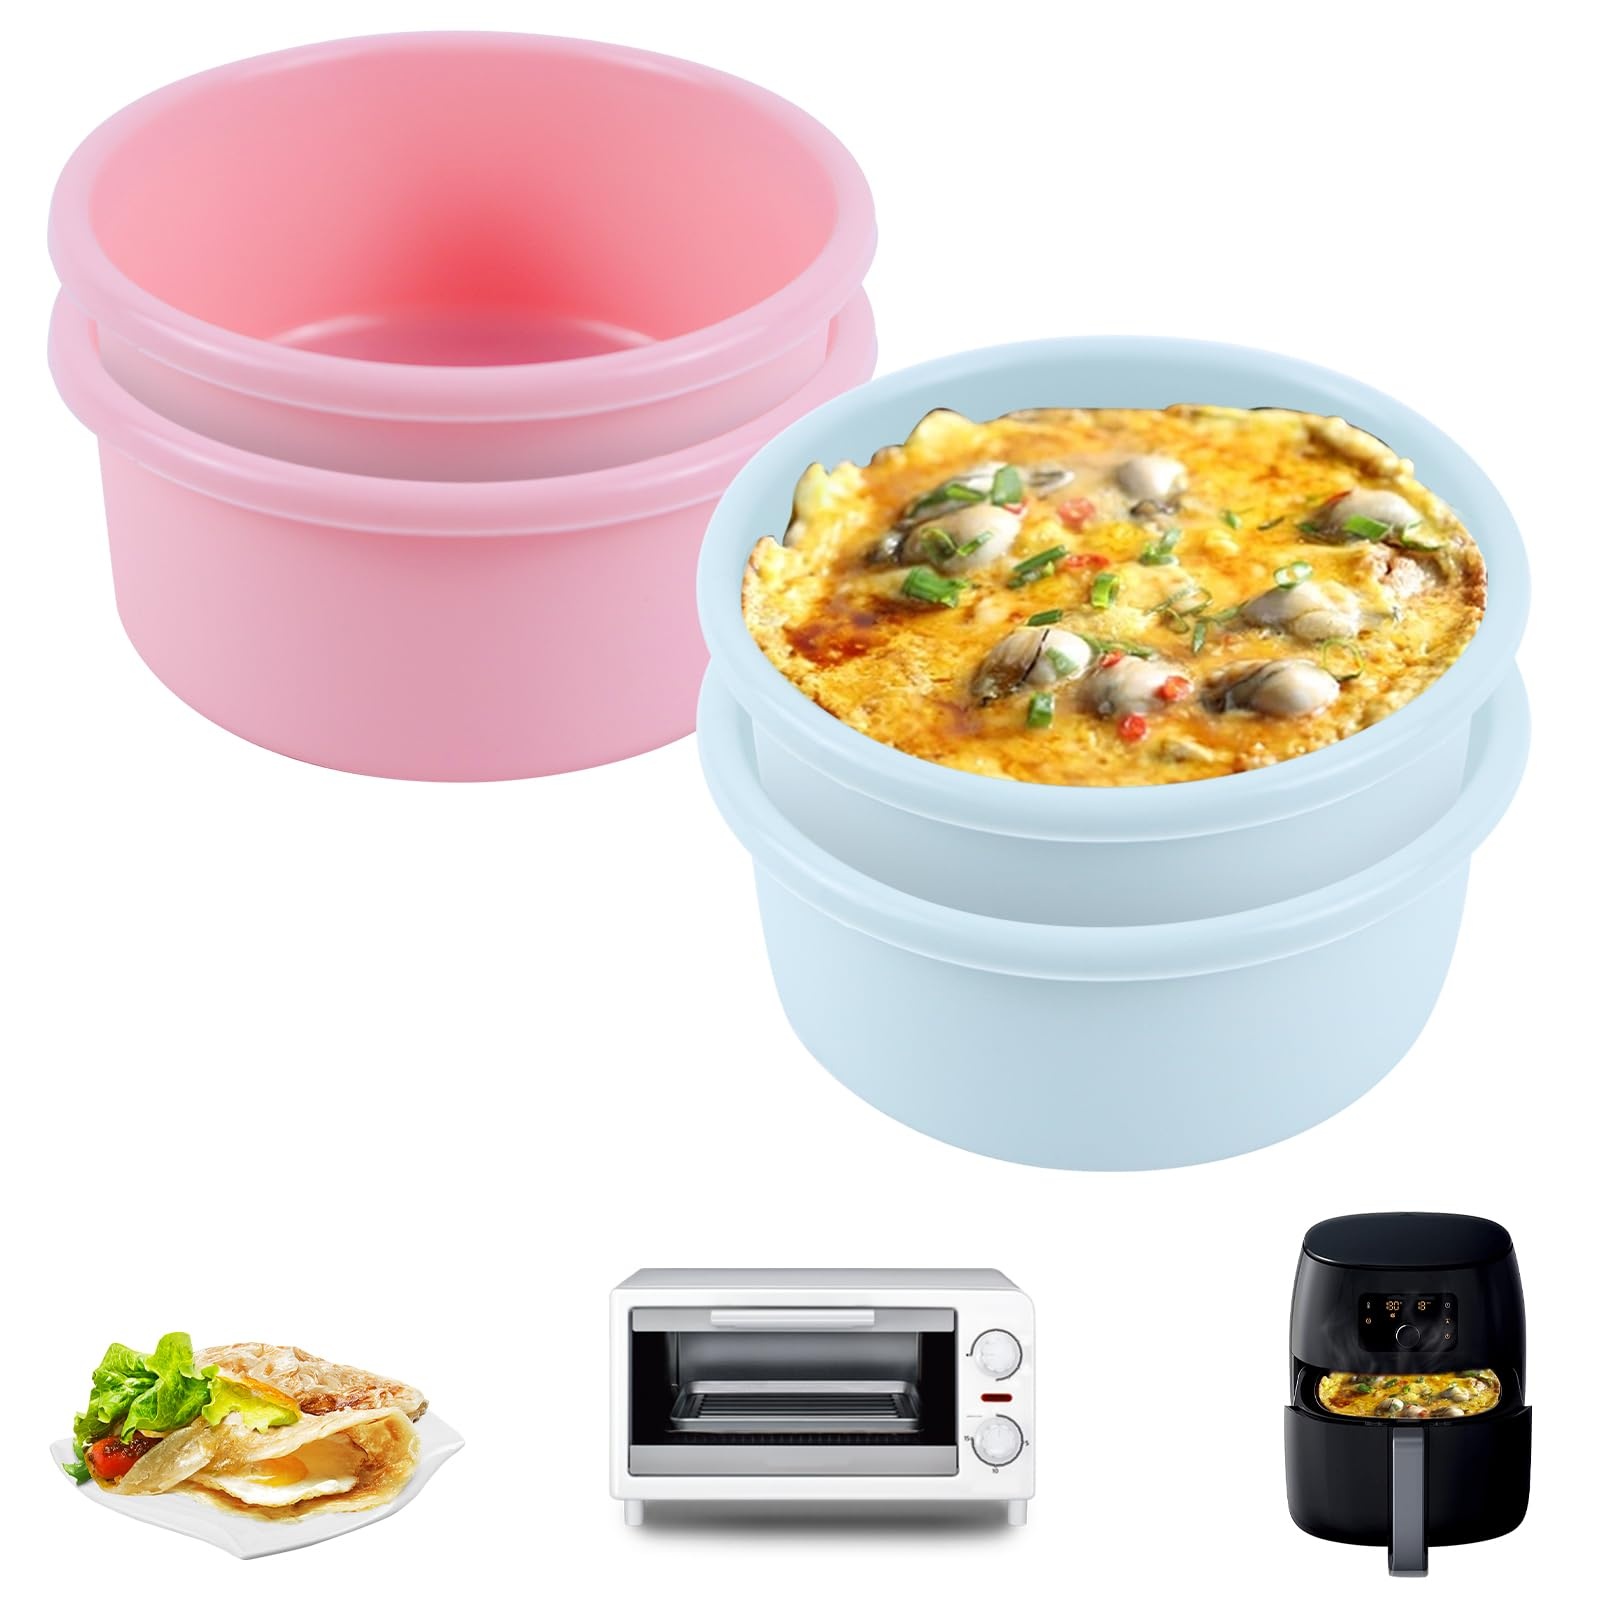 Silicone Oven Tray, 4pcs Silikon Eierpfanne, Silicone Air Fryer Egg Mold, Microwave Egg Cooker, Oven Air Fryer Silicone Egg Tray Set, Air Fryer Accessories for Oven Microwave (2 Blue+2 Pink)